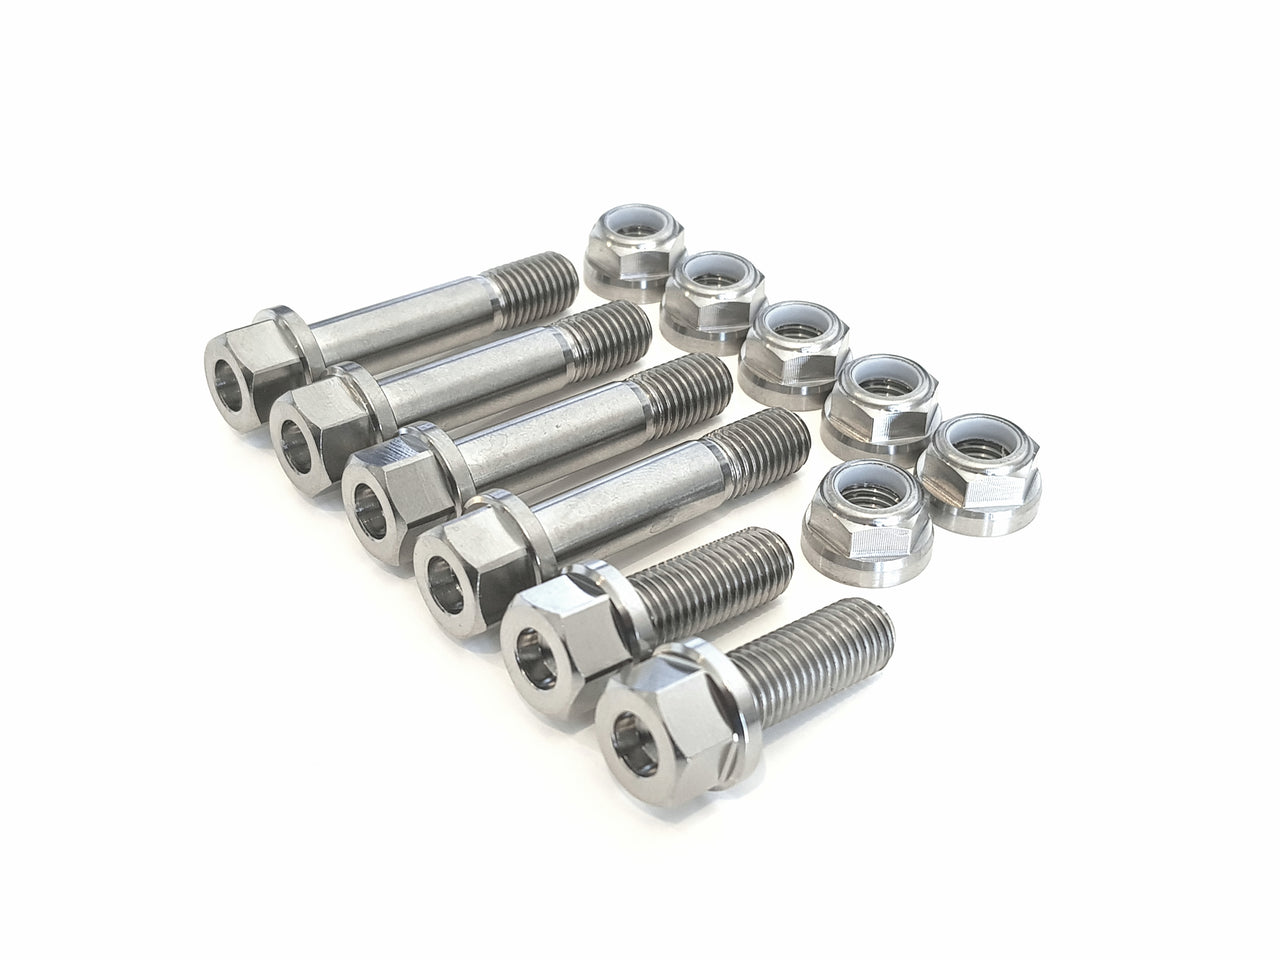 Wing Spud 7/16 Hex Pinch Bolt For Tab Mount Shock Towers